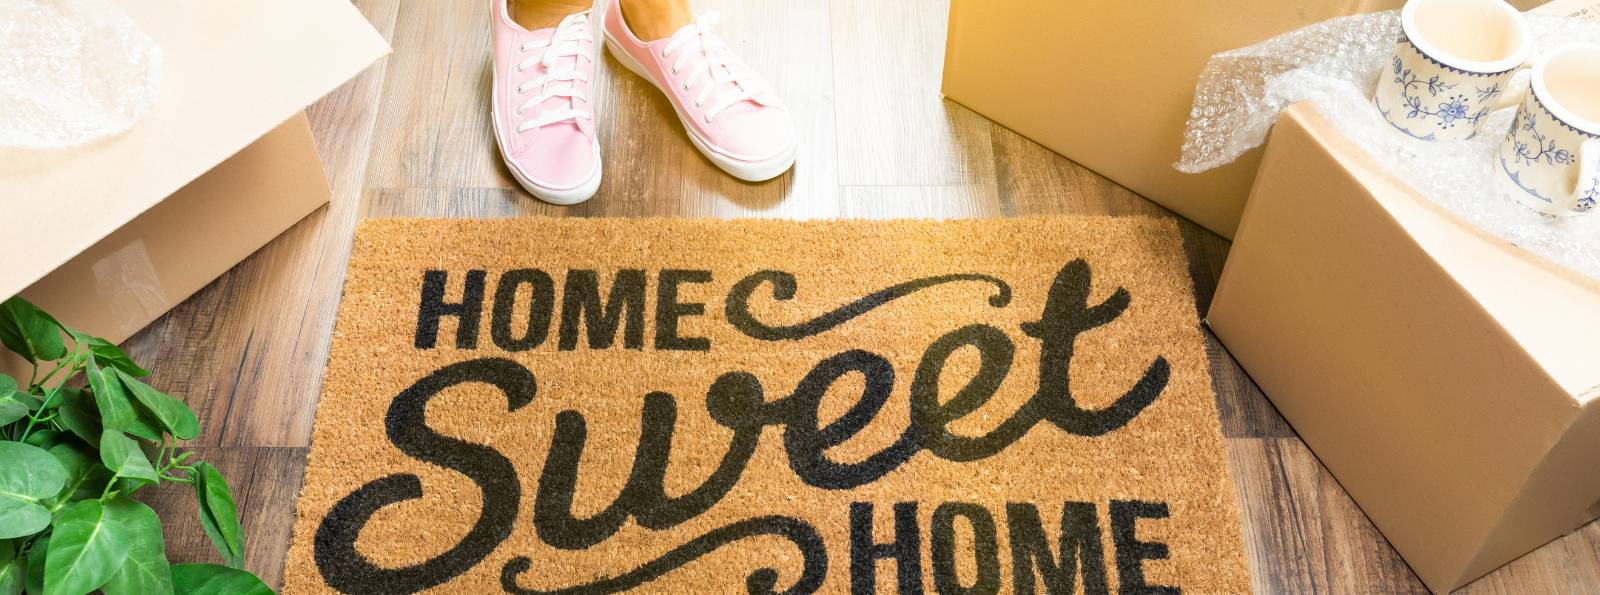 home sweet home doormat in a new house